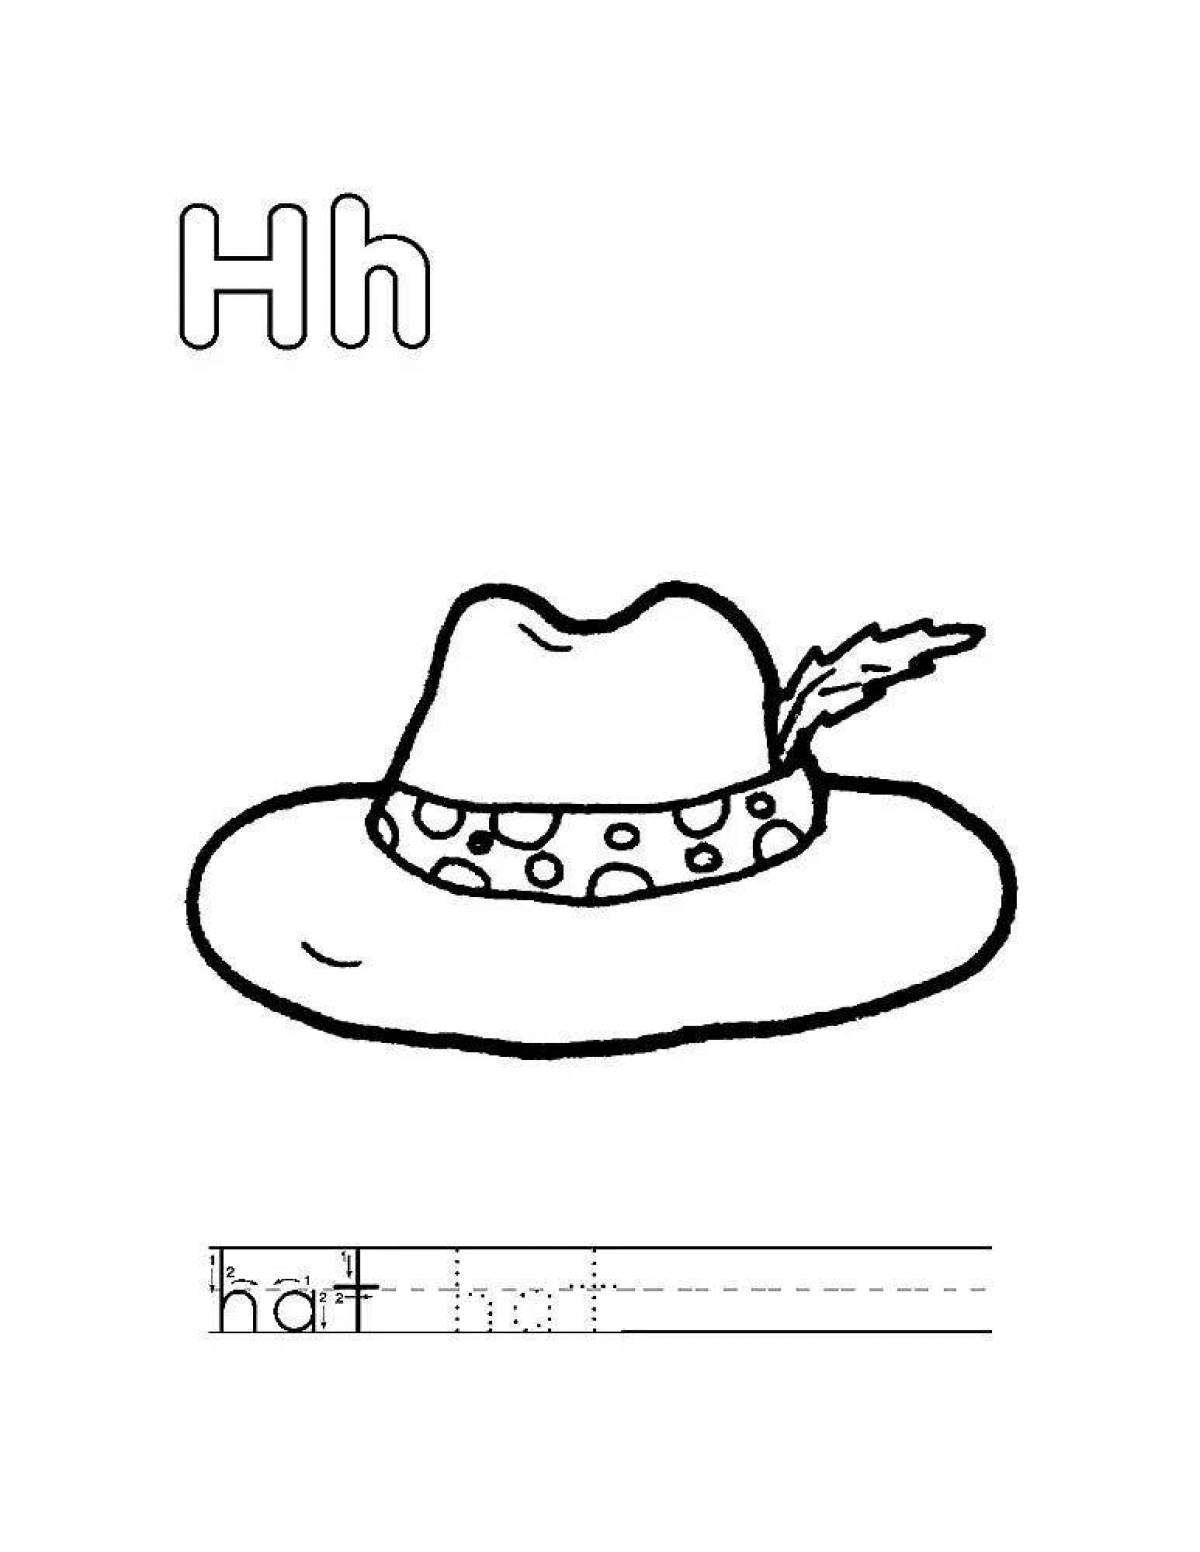 Bright vibrant hat coloring book for kids